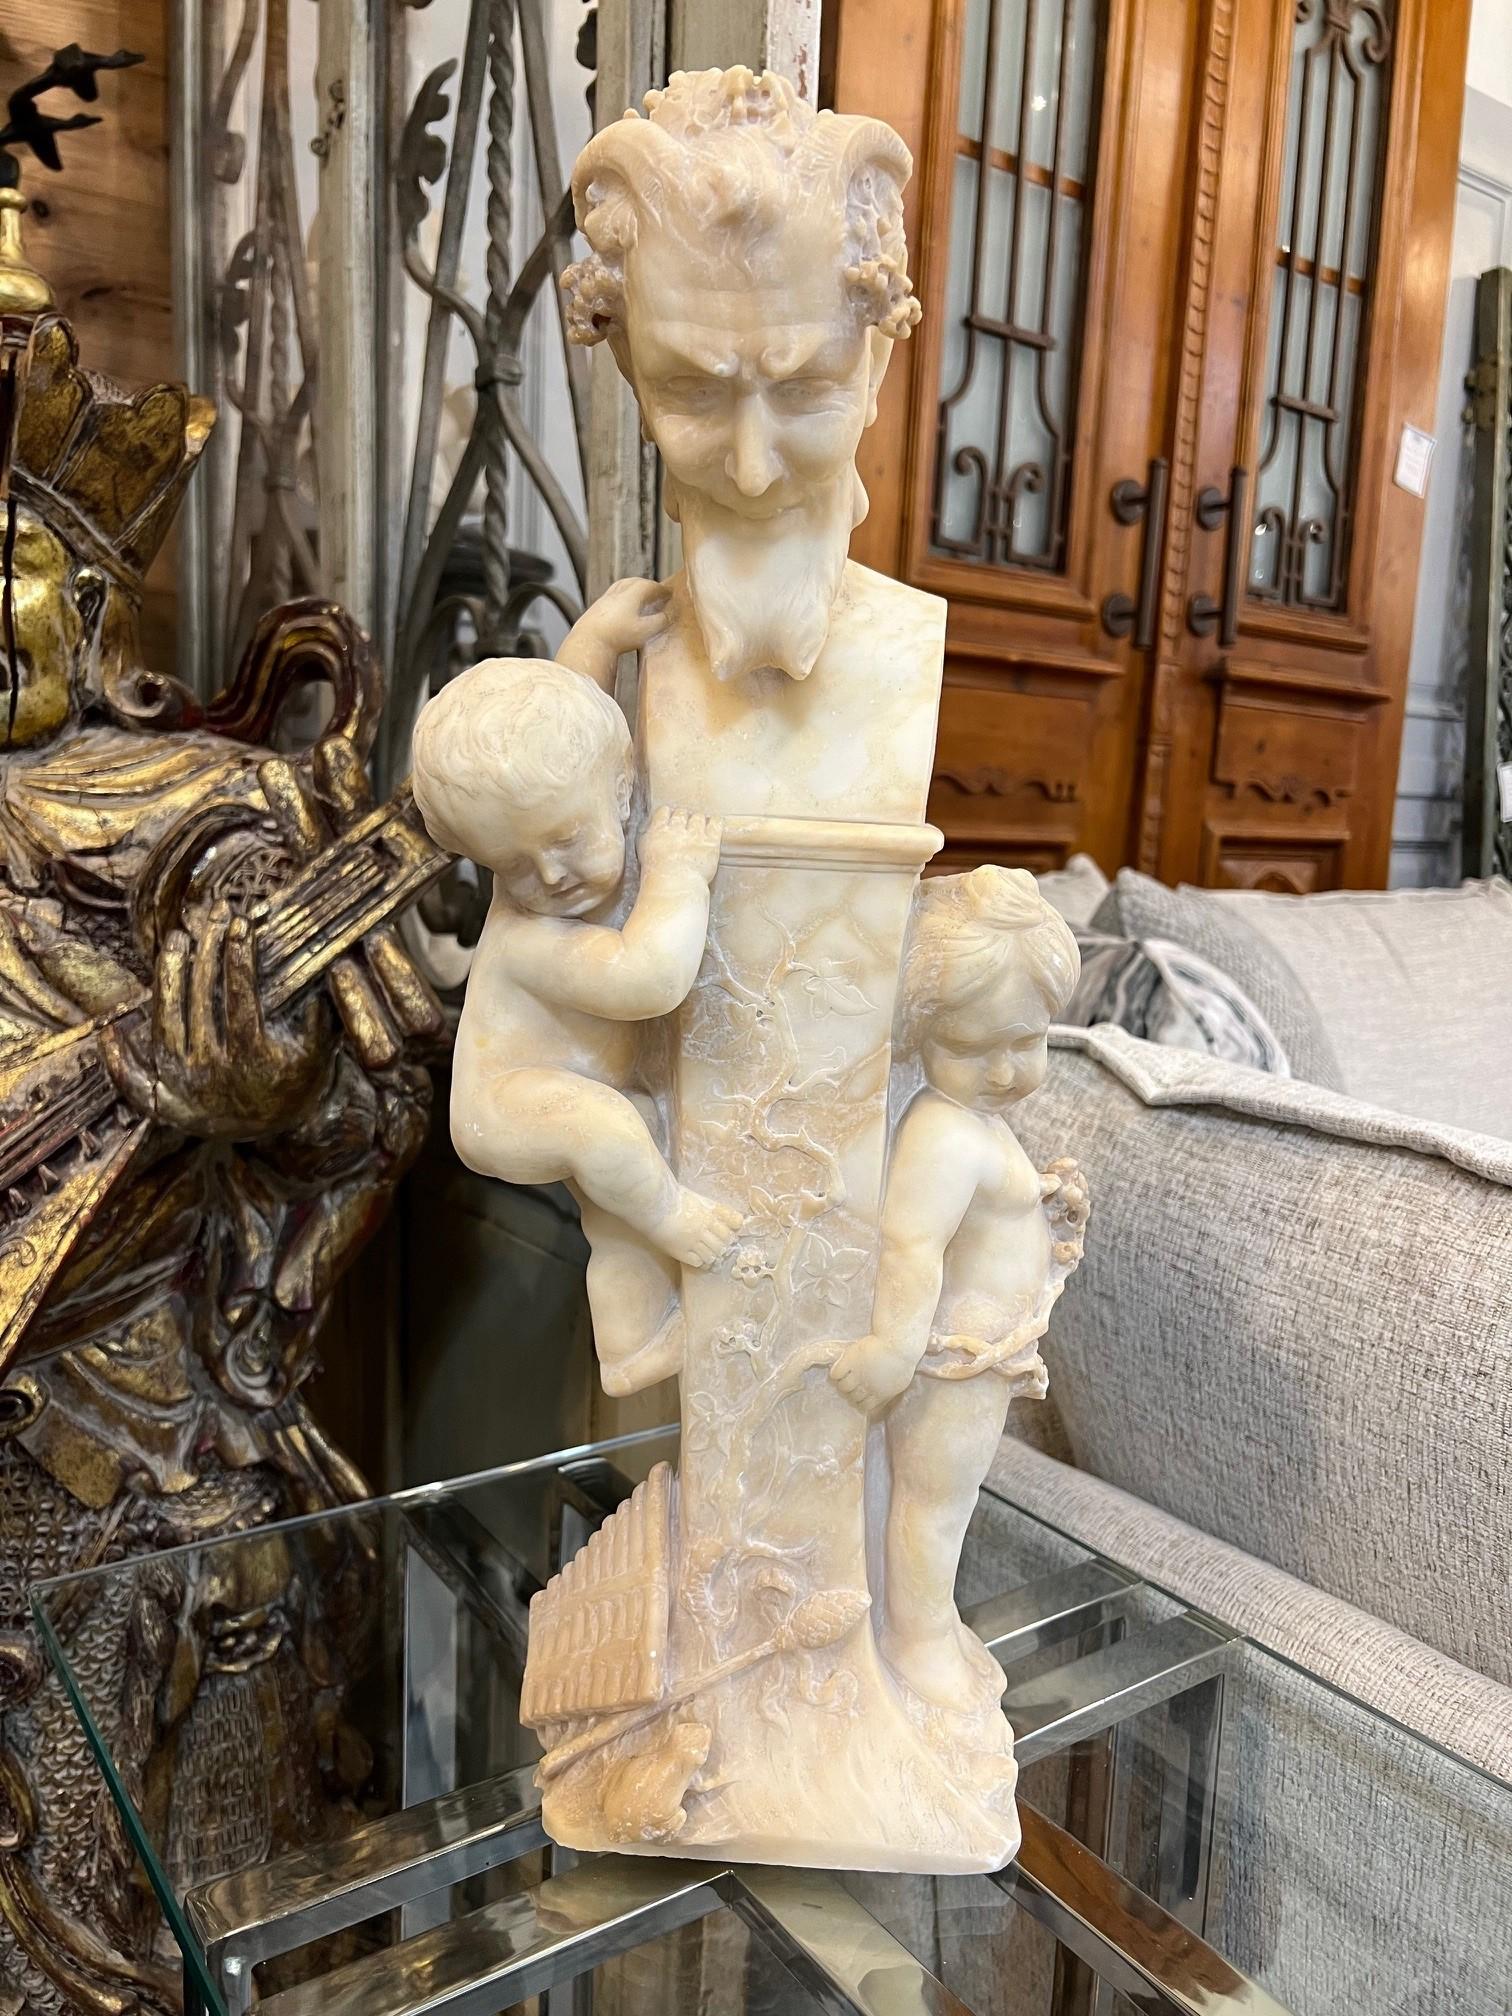 An antique Italian alabaster bust of Pan on a pedestal with two small children sculpture. Pan not being a major god was still a significant figure in Greek mythology. He was the god of shepherds, music, and fertility, and he was often depicted as a